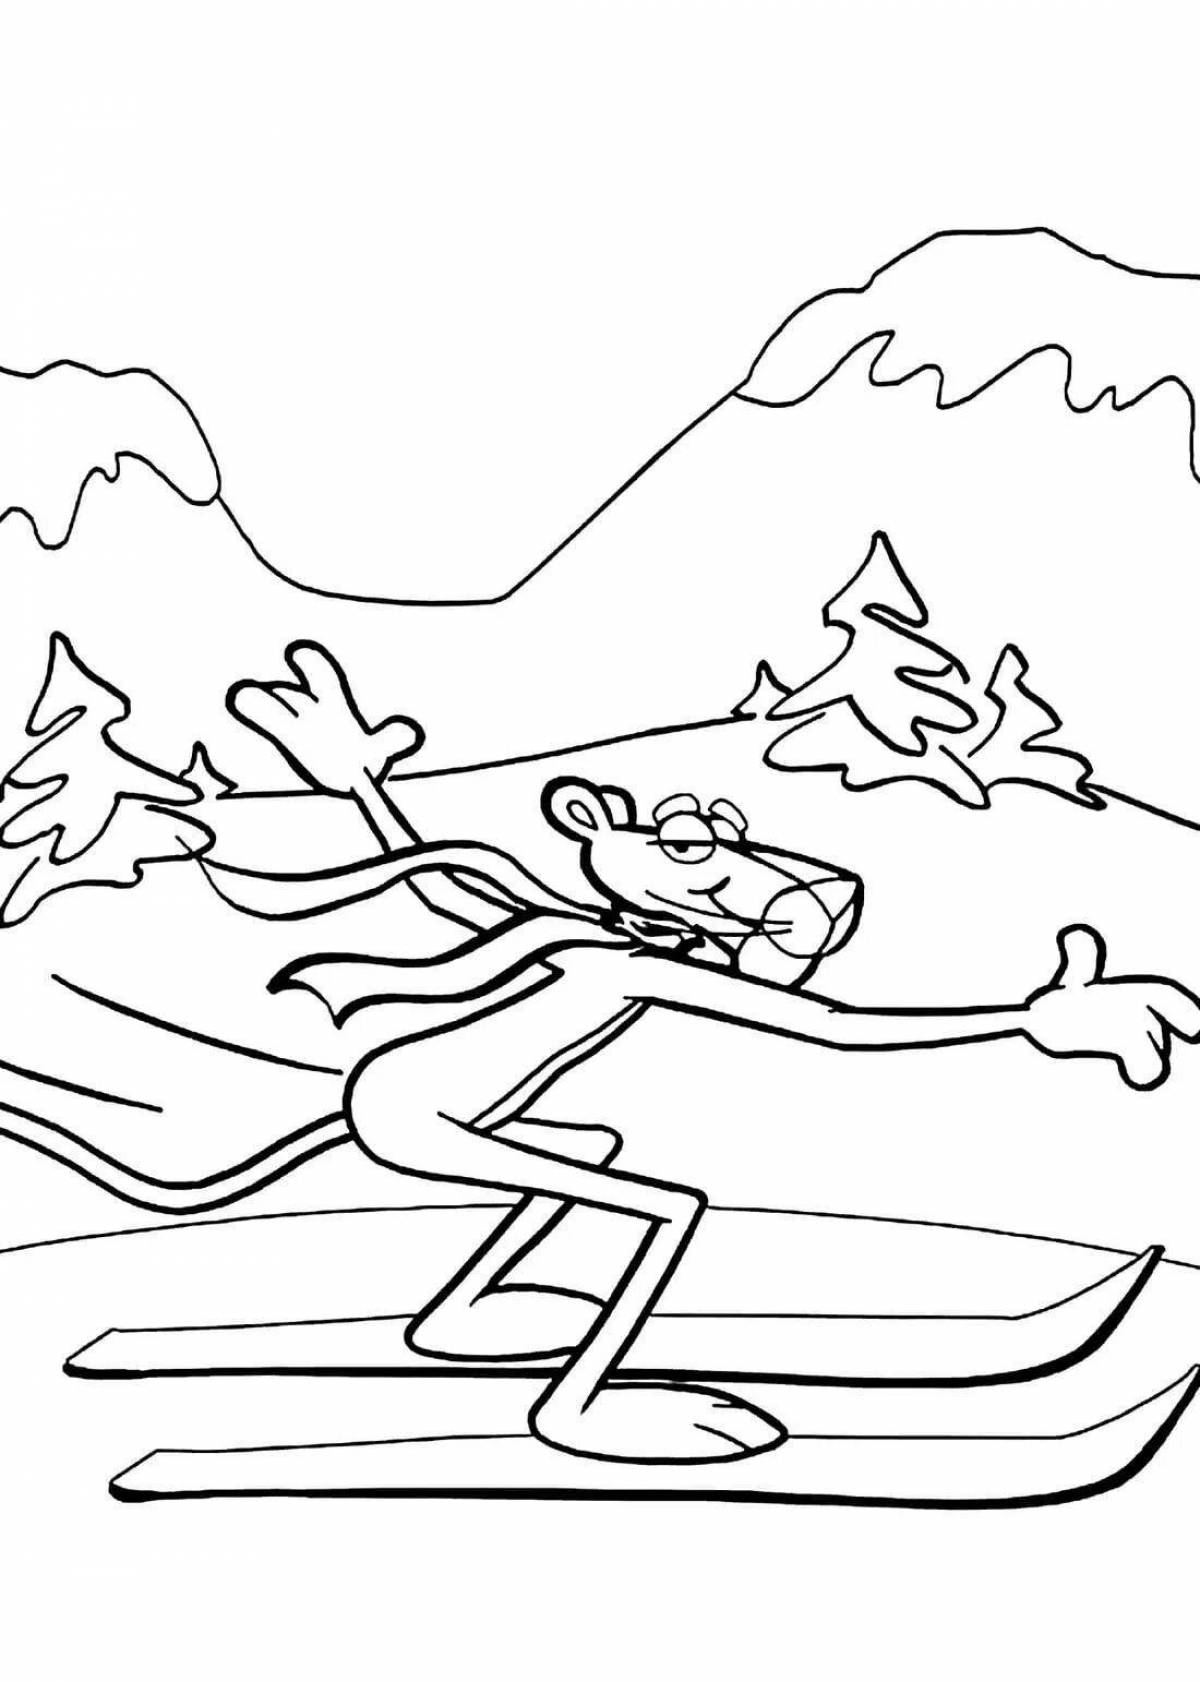 Awesome ice beware coloring page